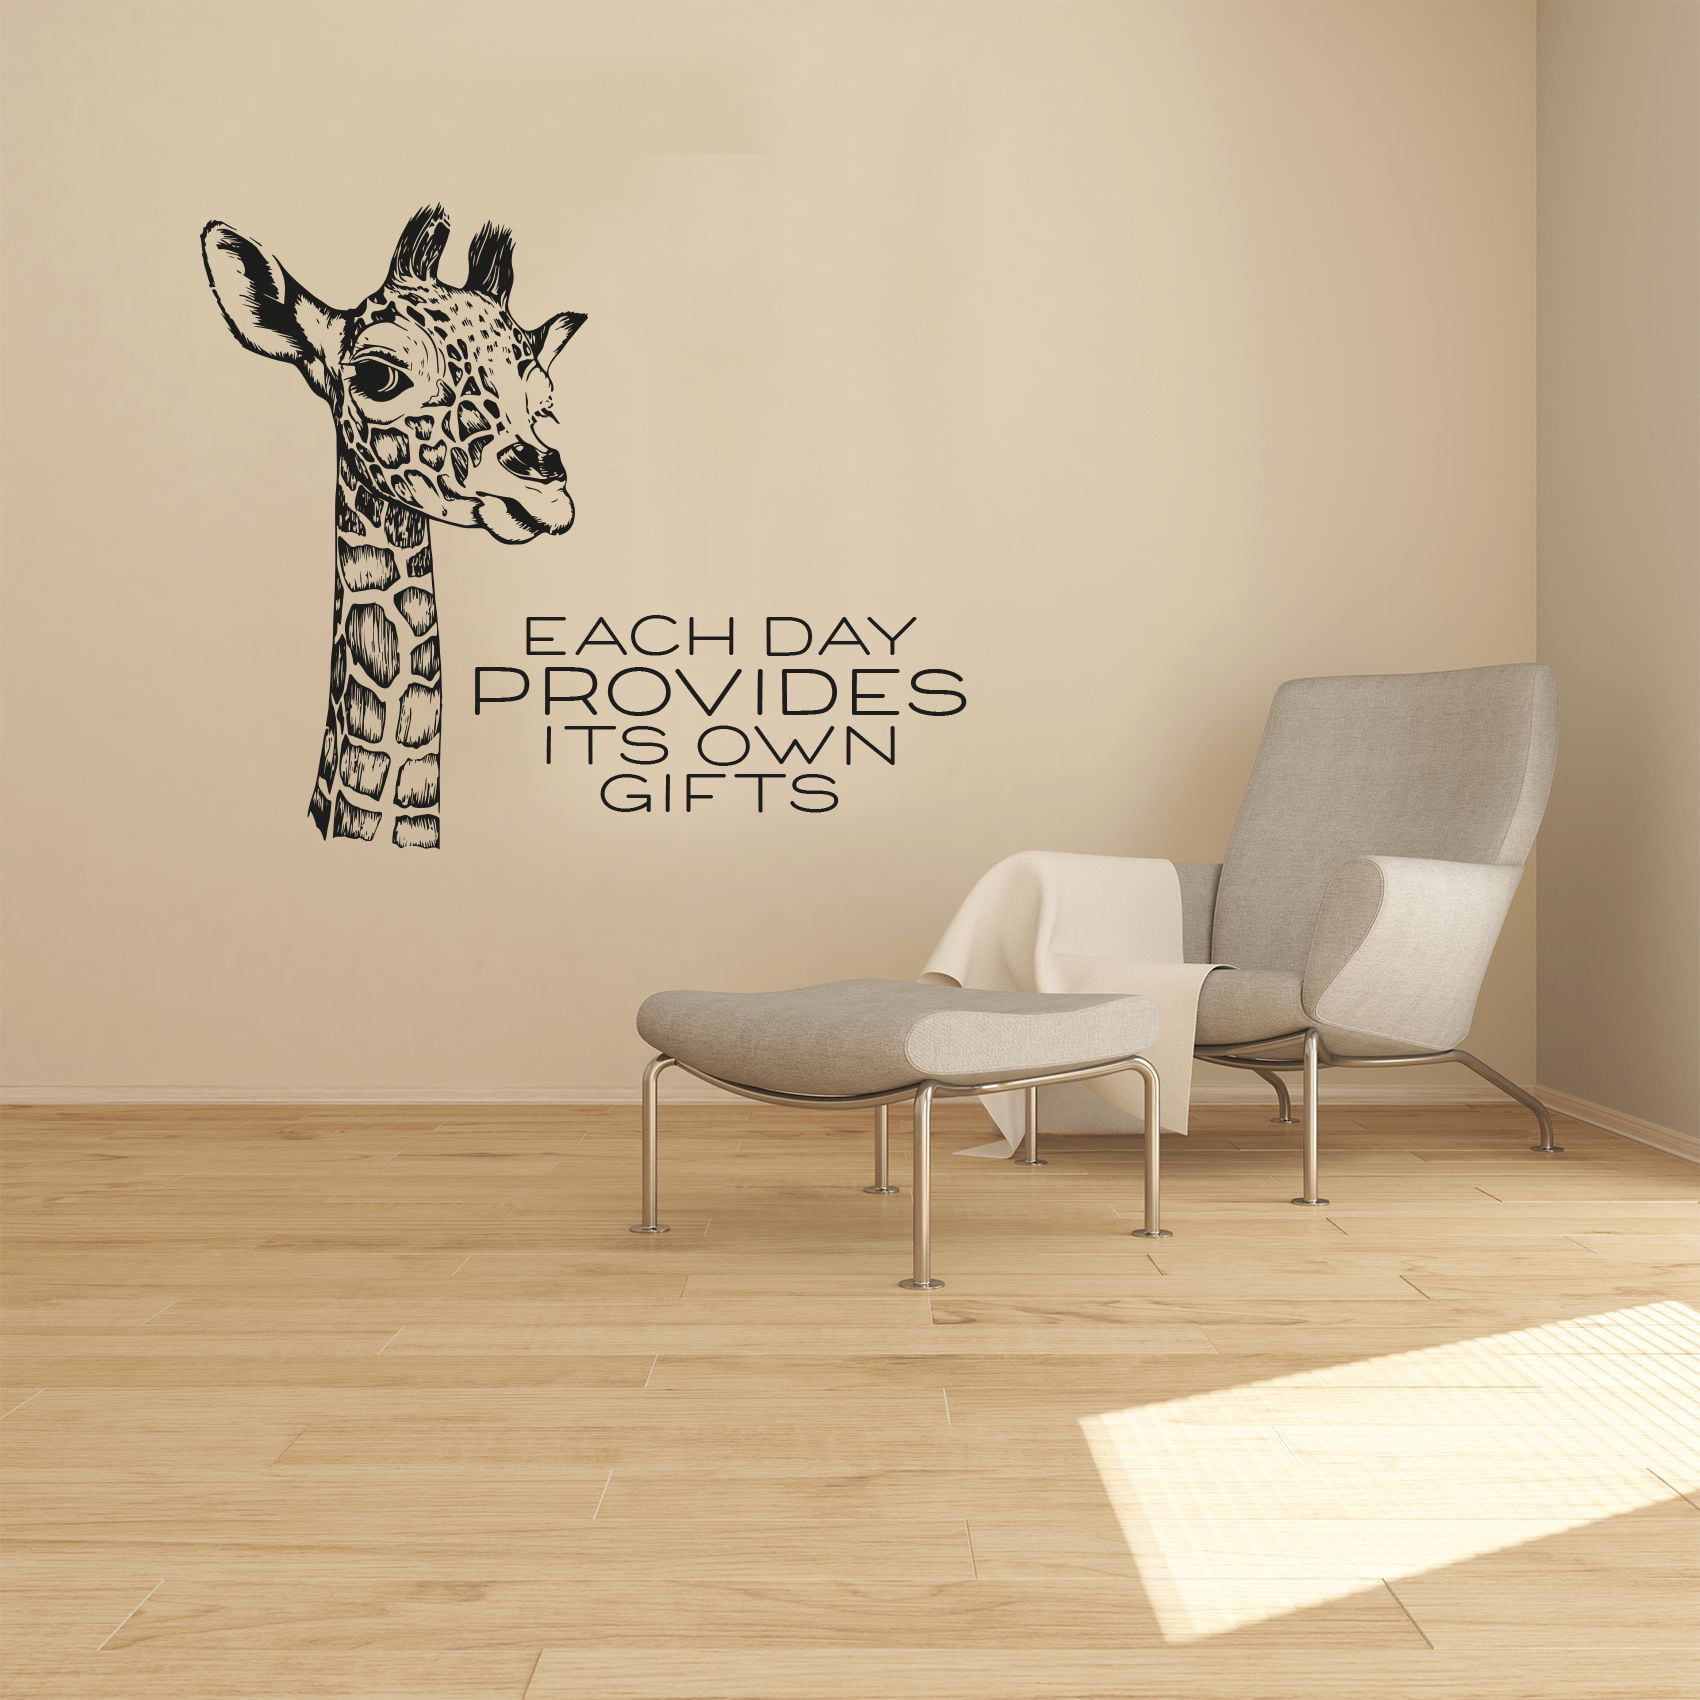 Playroom 'Be Faithful' Quote Mural Decal Motivational Quote. Wall Decor Home Children's Bedroom Lounge Vinyl Wall Art Sticker Office 